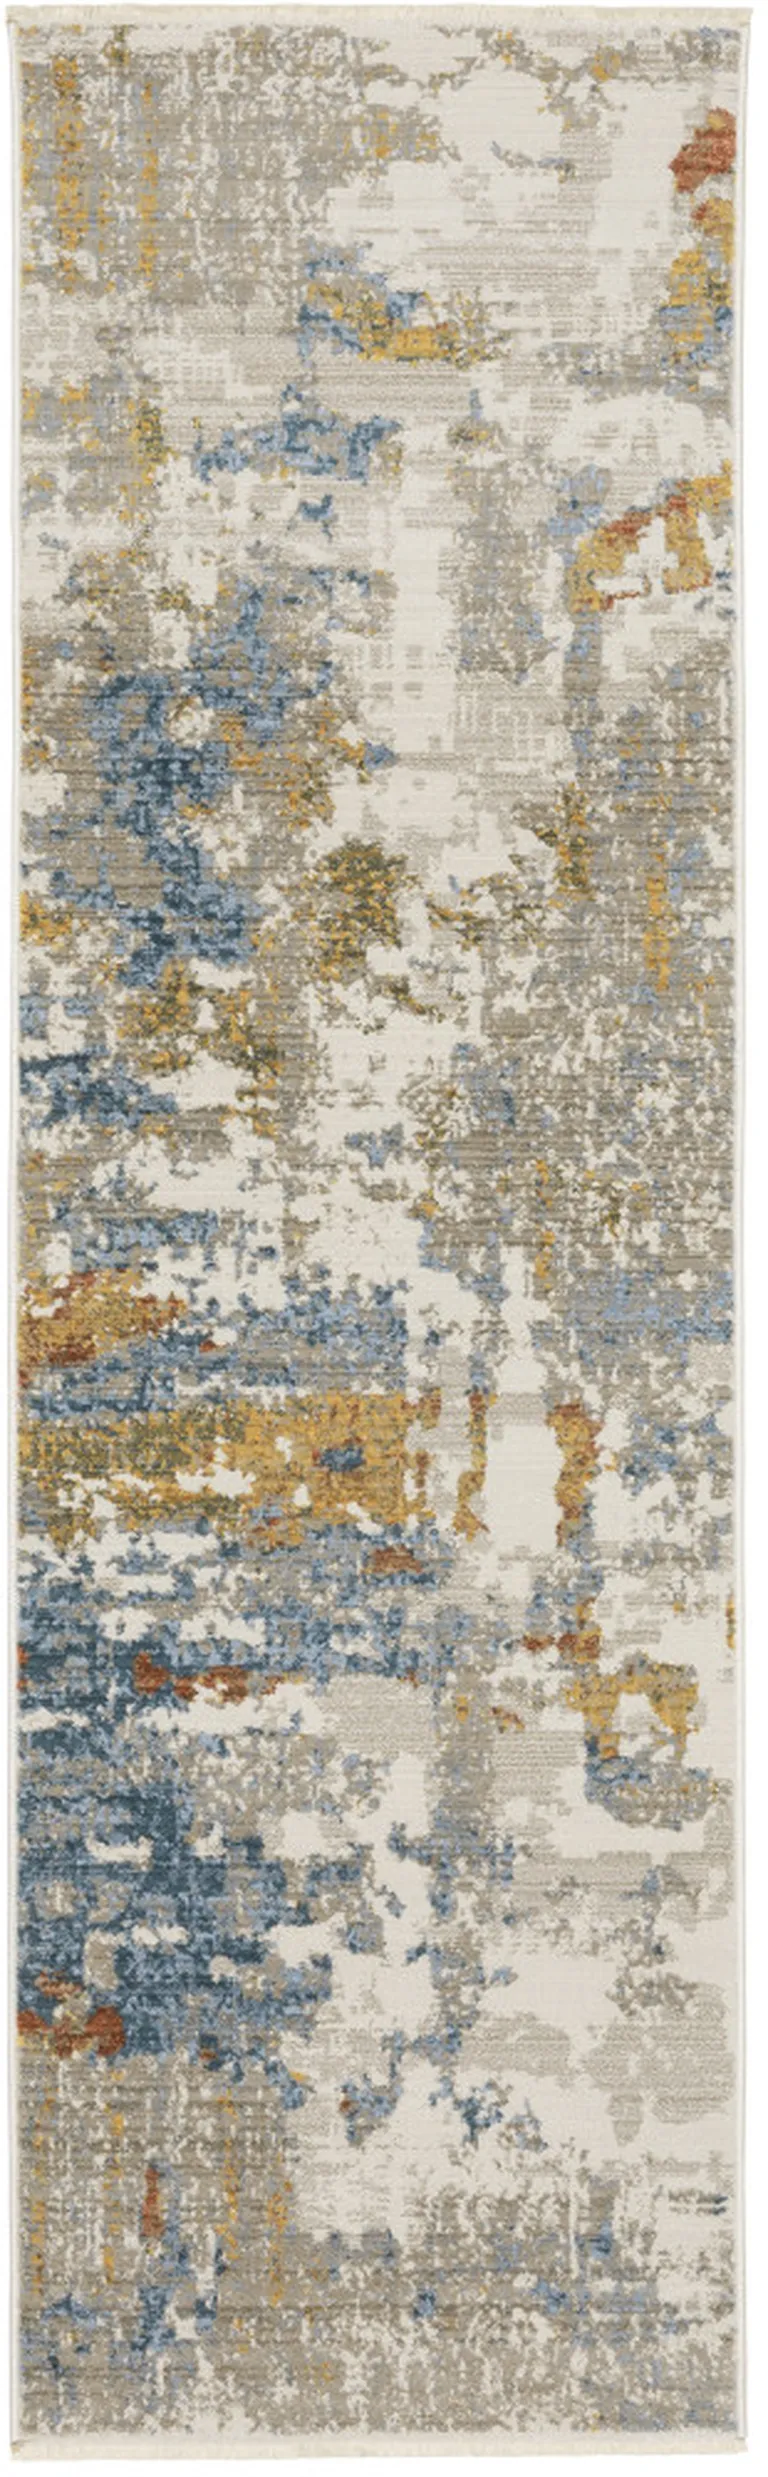 8' Beige Grey Gold Blue Rust And Teal Abstract Power Loom Runner Rug With Fringe Photo 1